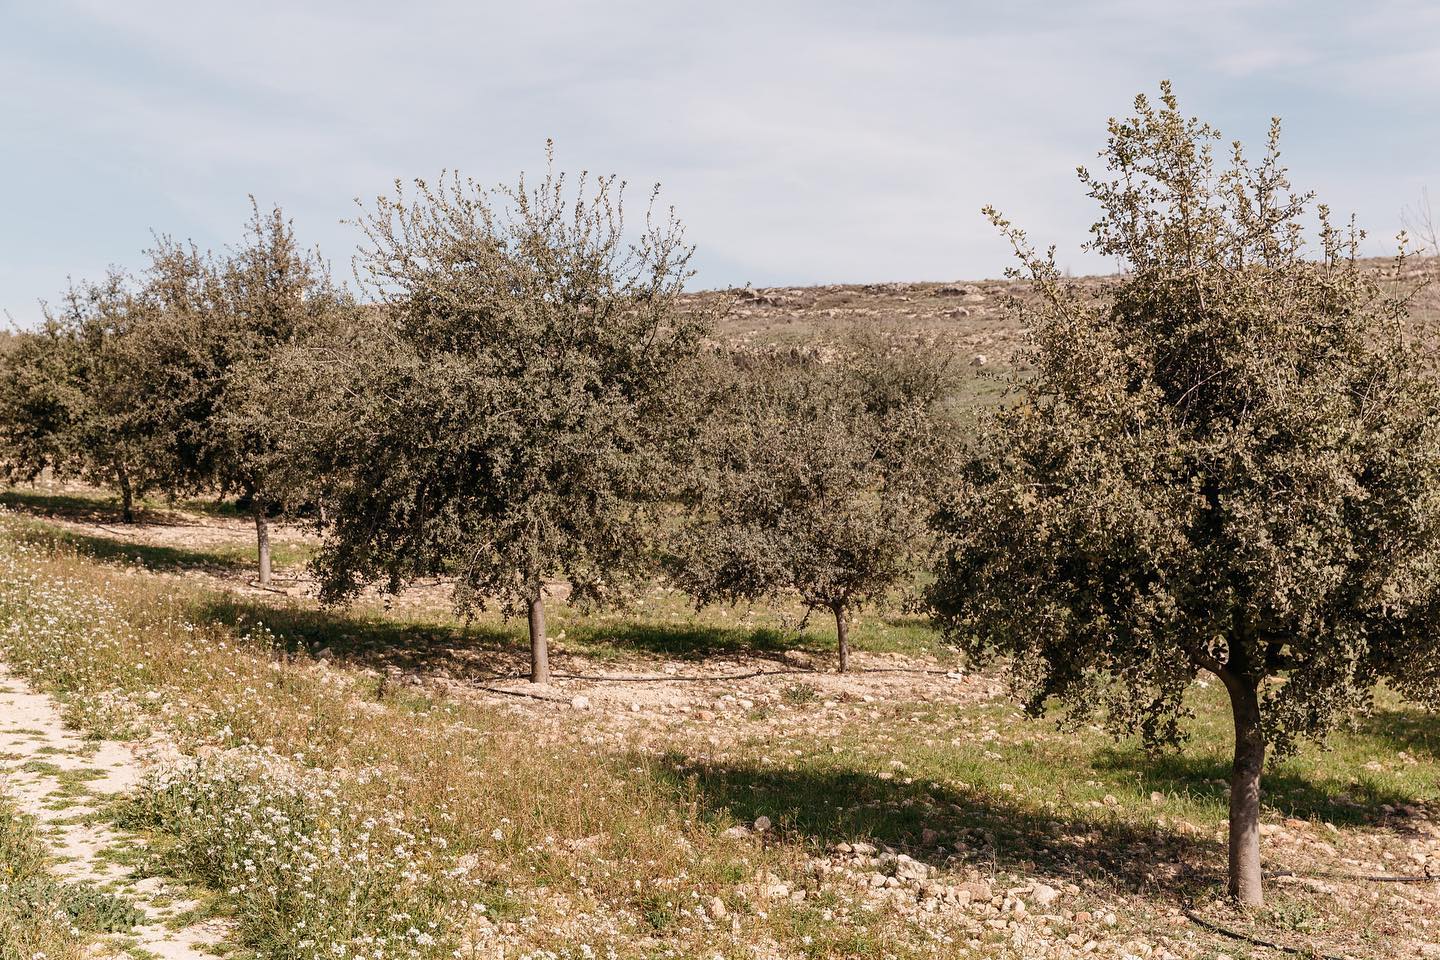 Plantaciones 
•
Own crops 
•
Photo @pacomarinphoto
•
#tubermelanosporum #ownproduction #crops #harvesing #quality #truffle #company #nature #environment #organic #product #supreme #quality #qualitycertifications #ecosystem #holmoak #yearround #production #service #capacity #constancy #work #sacrifice #companytradition #innovate #expand #truefeels #ownproduction #generation #family #business #treasure